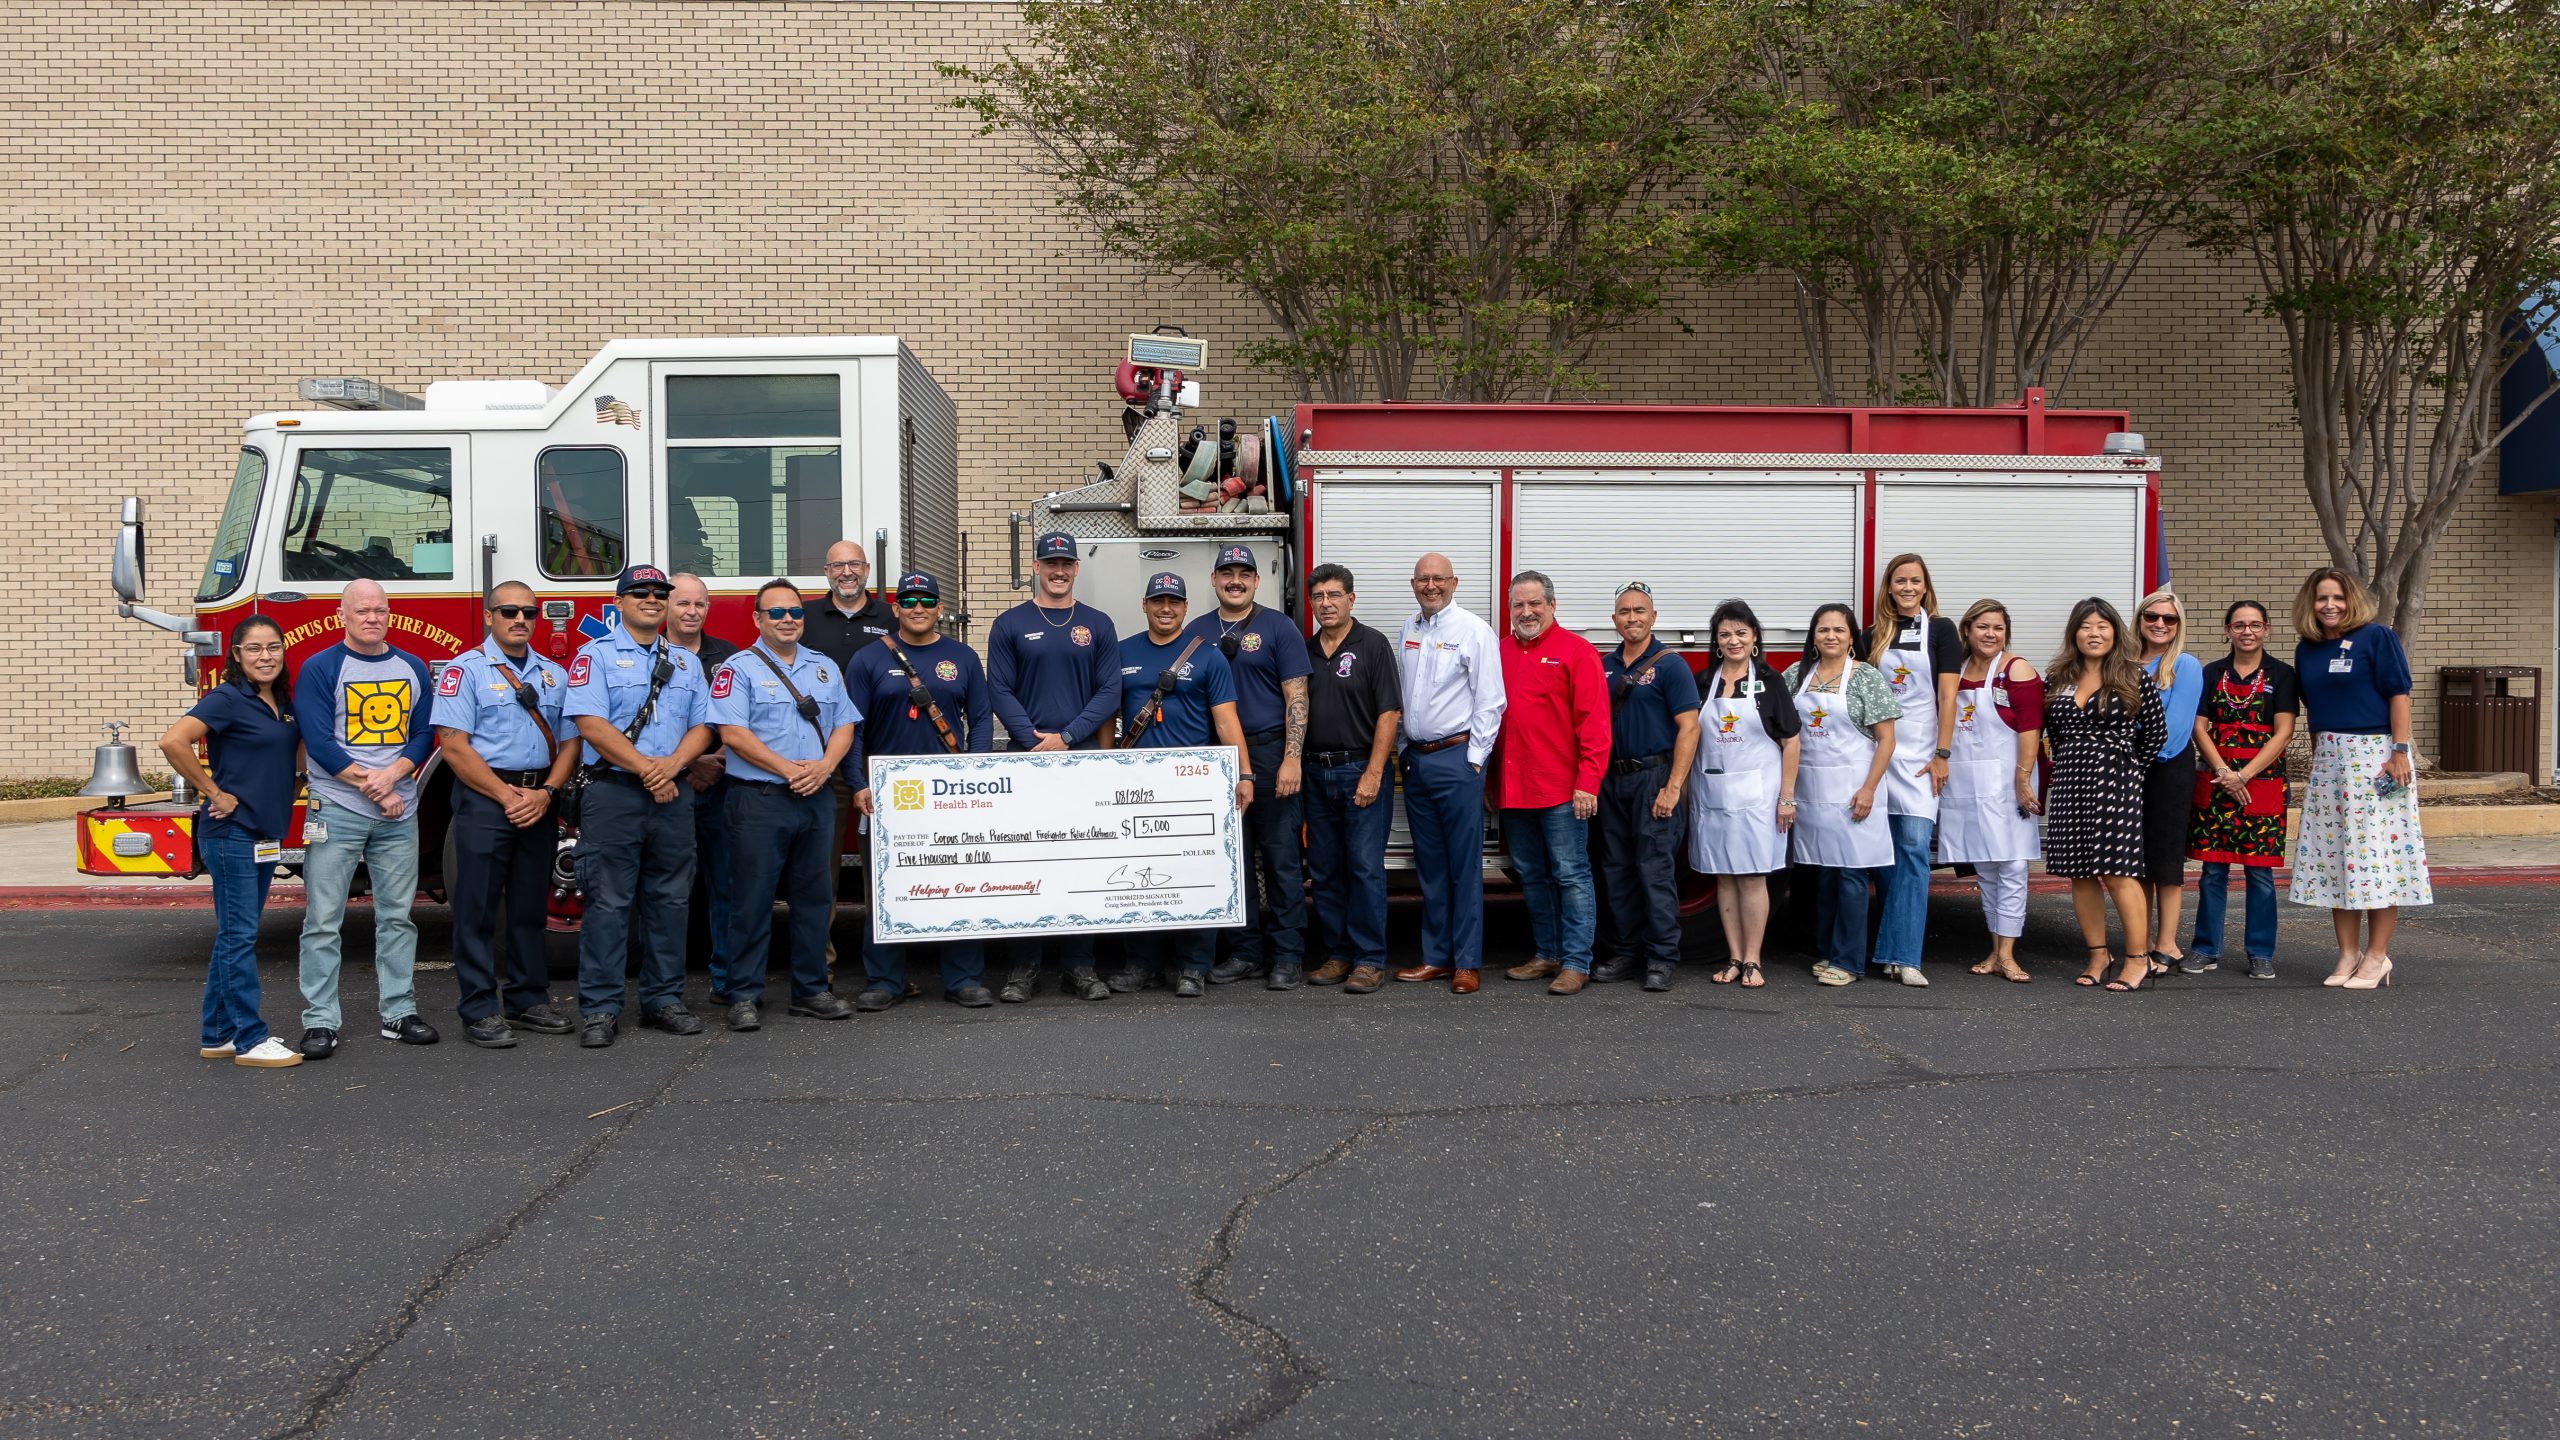 Featured image for “2023 Chili Cookoff & Driscoll Check Presentation”